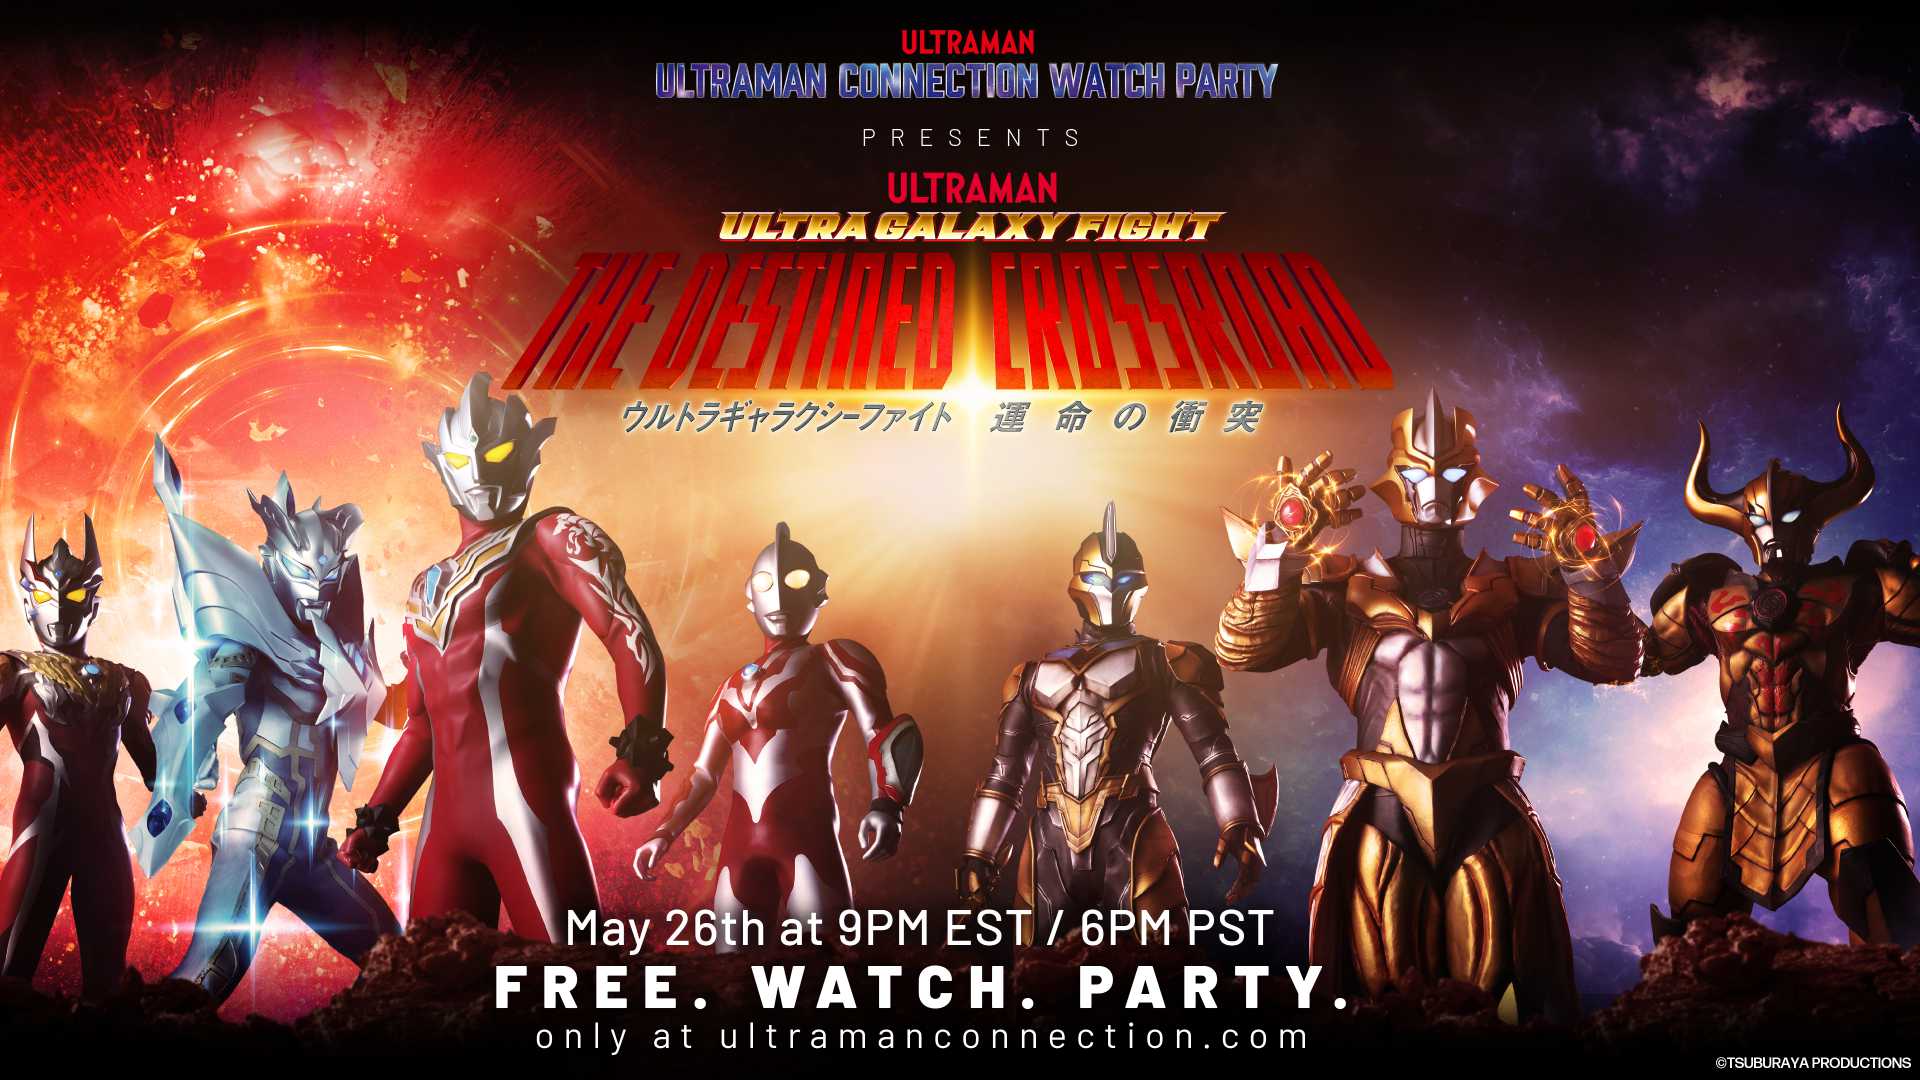 ULTRAMAN CONNECTION WATCH PARTY: THE DESTINED CROSSROAD IS ONE OF UC’S BIGGEST SHOWS YET!